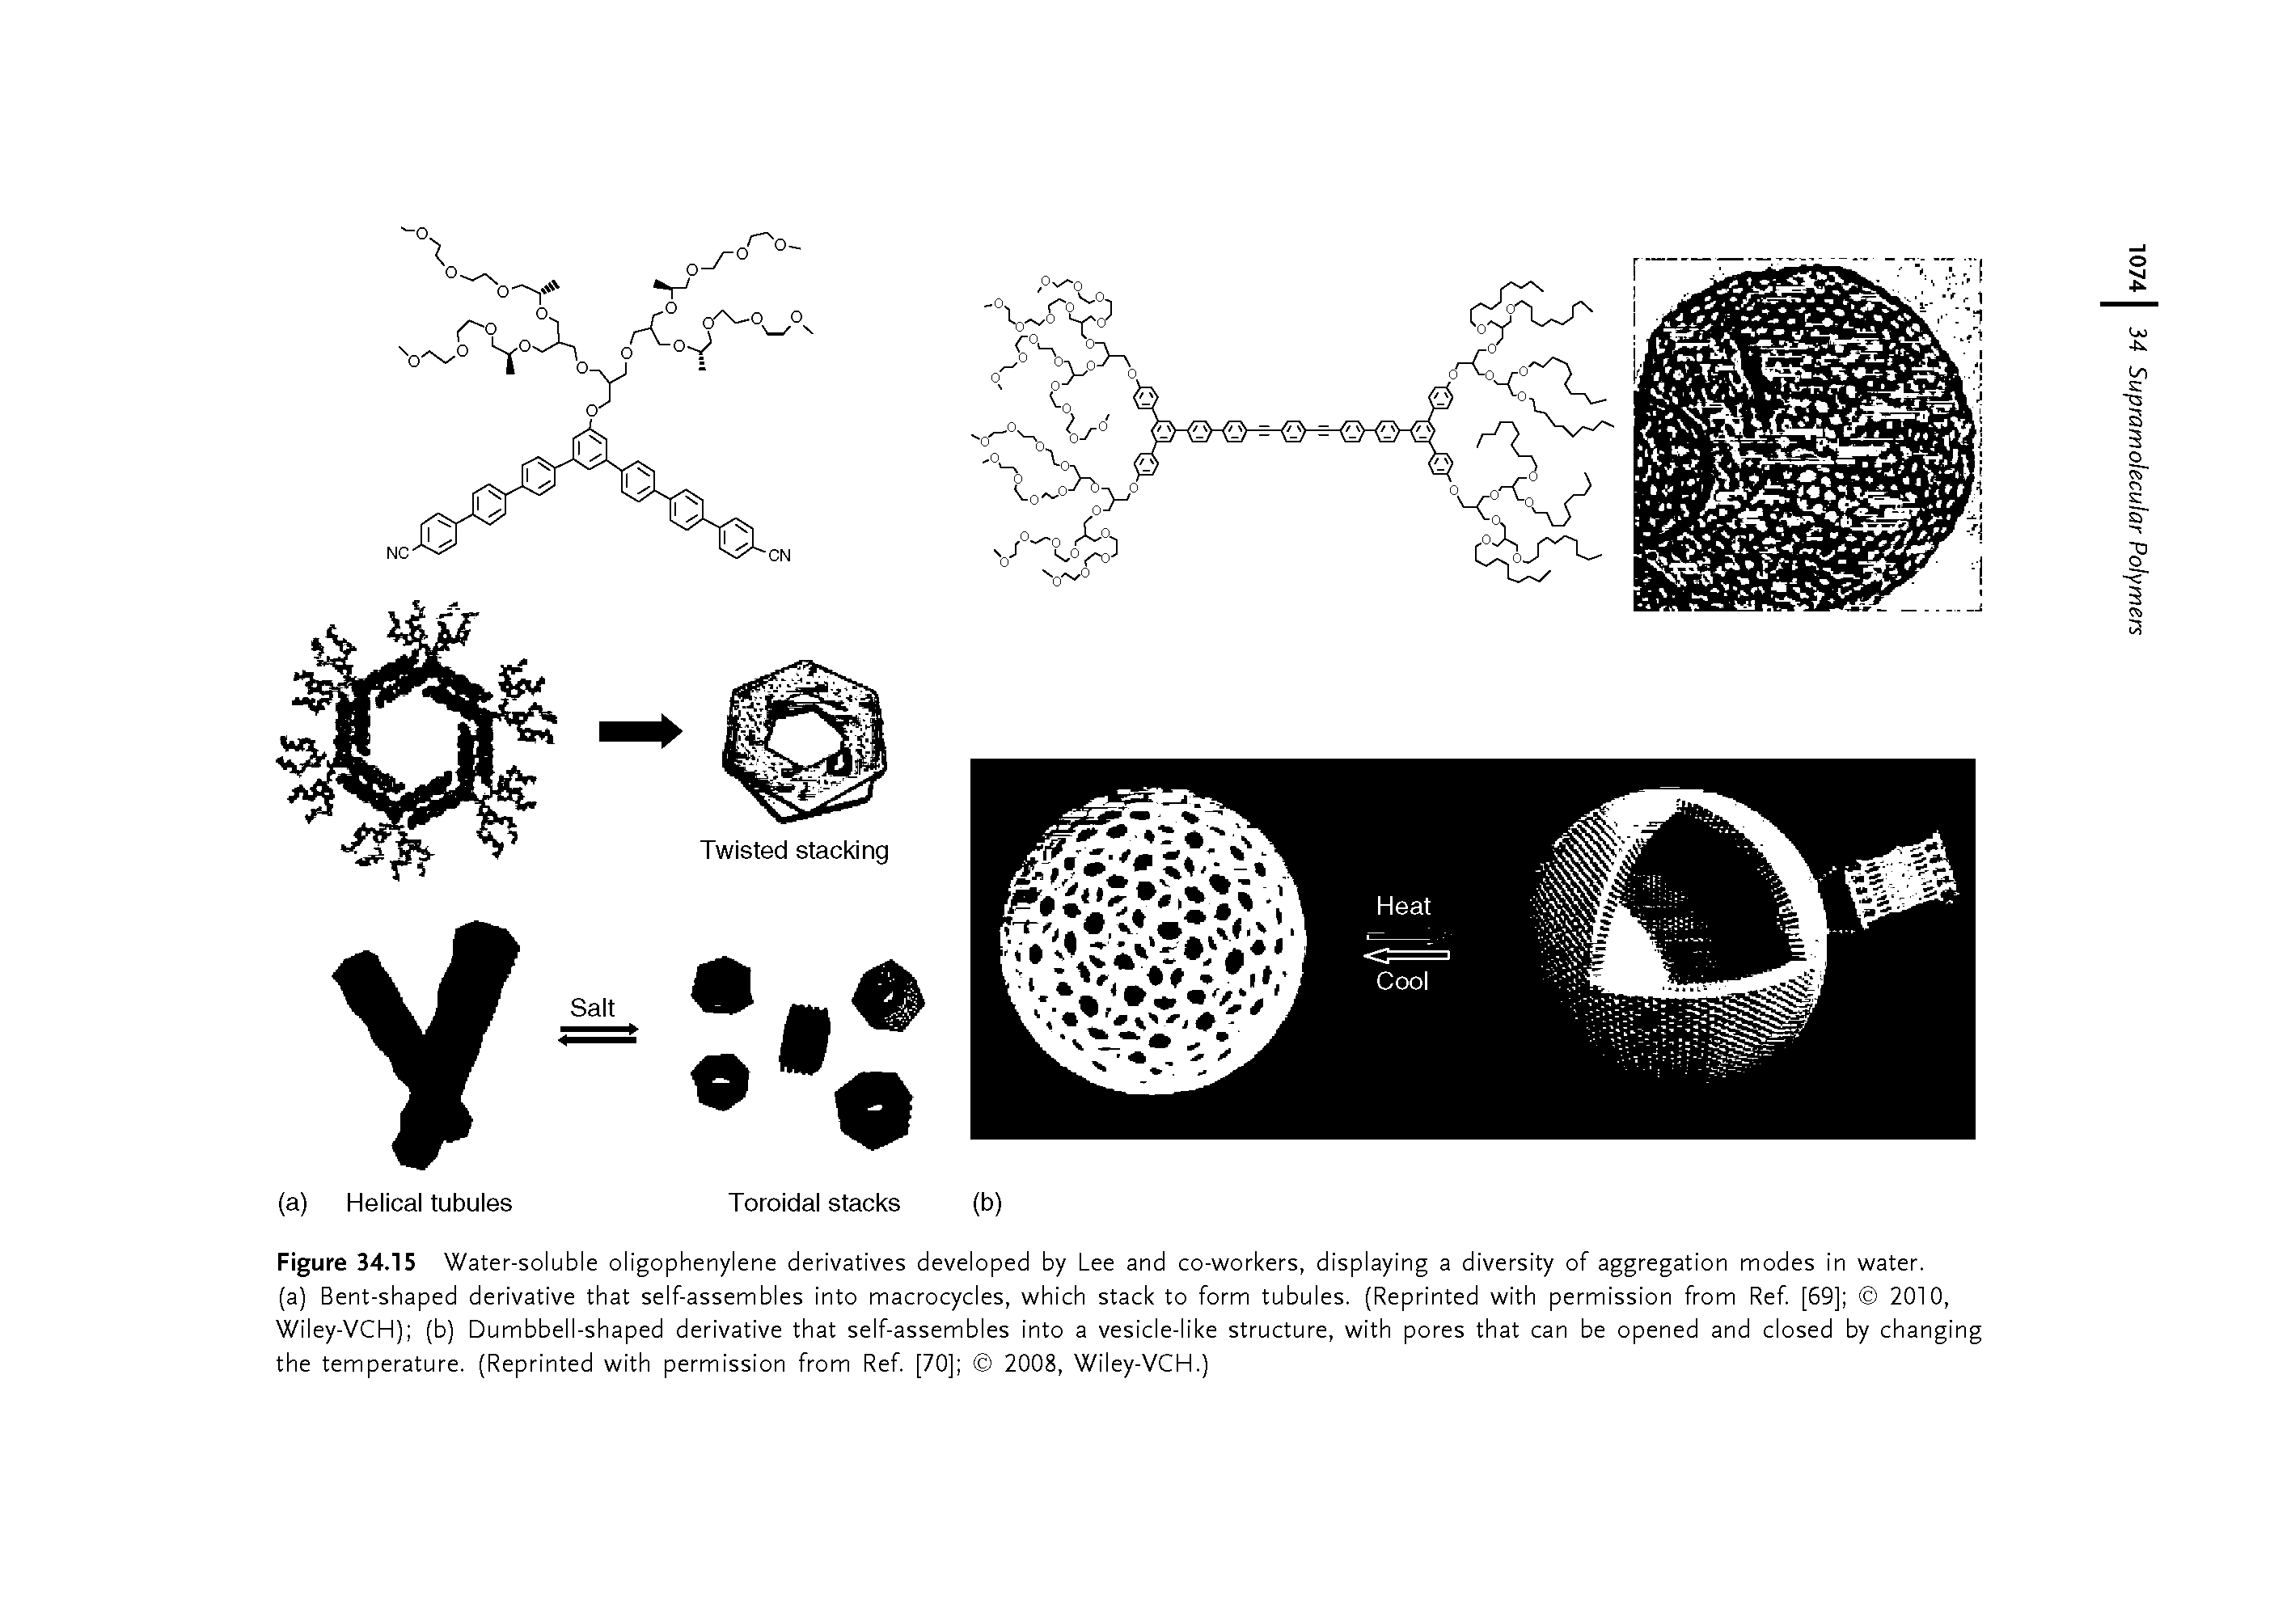 Figure 34.15 Water-soluble oligophenylene derivatives developed by Lee and co-workers, displaying a diversity of aggregation modes in water.